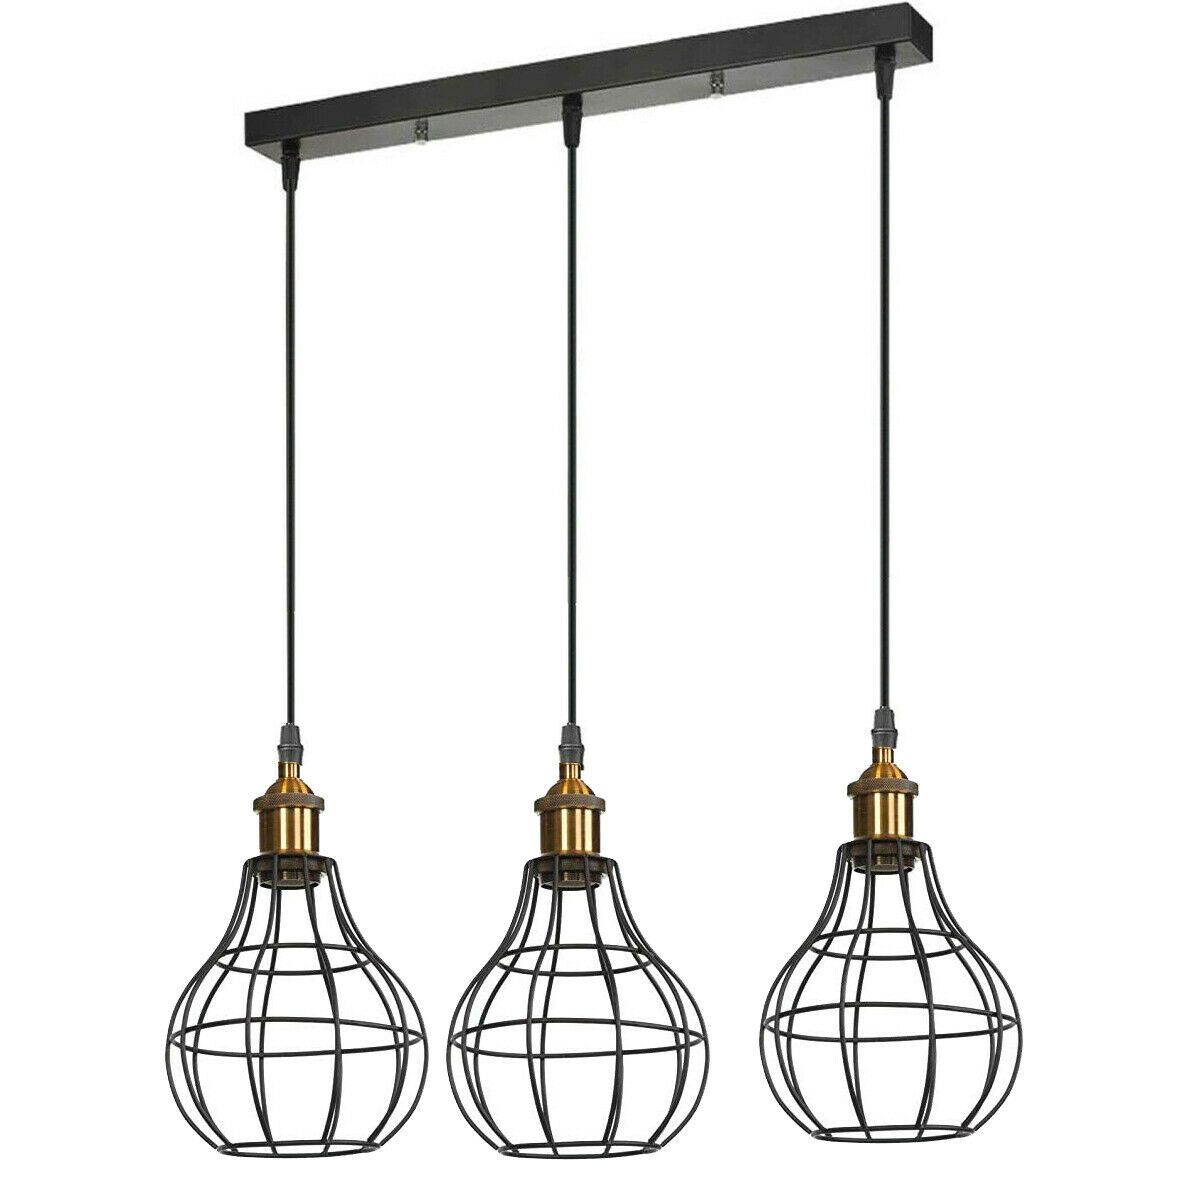  Wire Cage Style Retro Ceiling Pendant Light 3 Head Ceiling Lamp